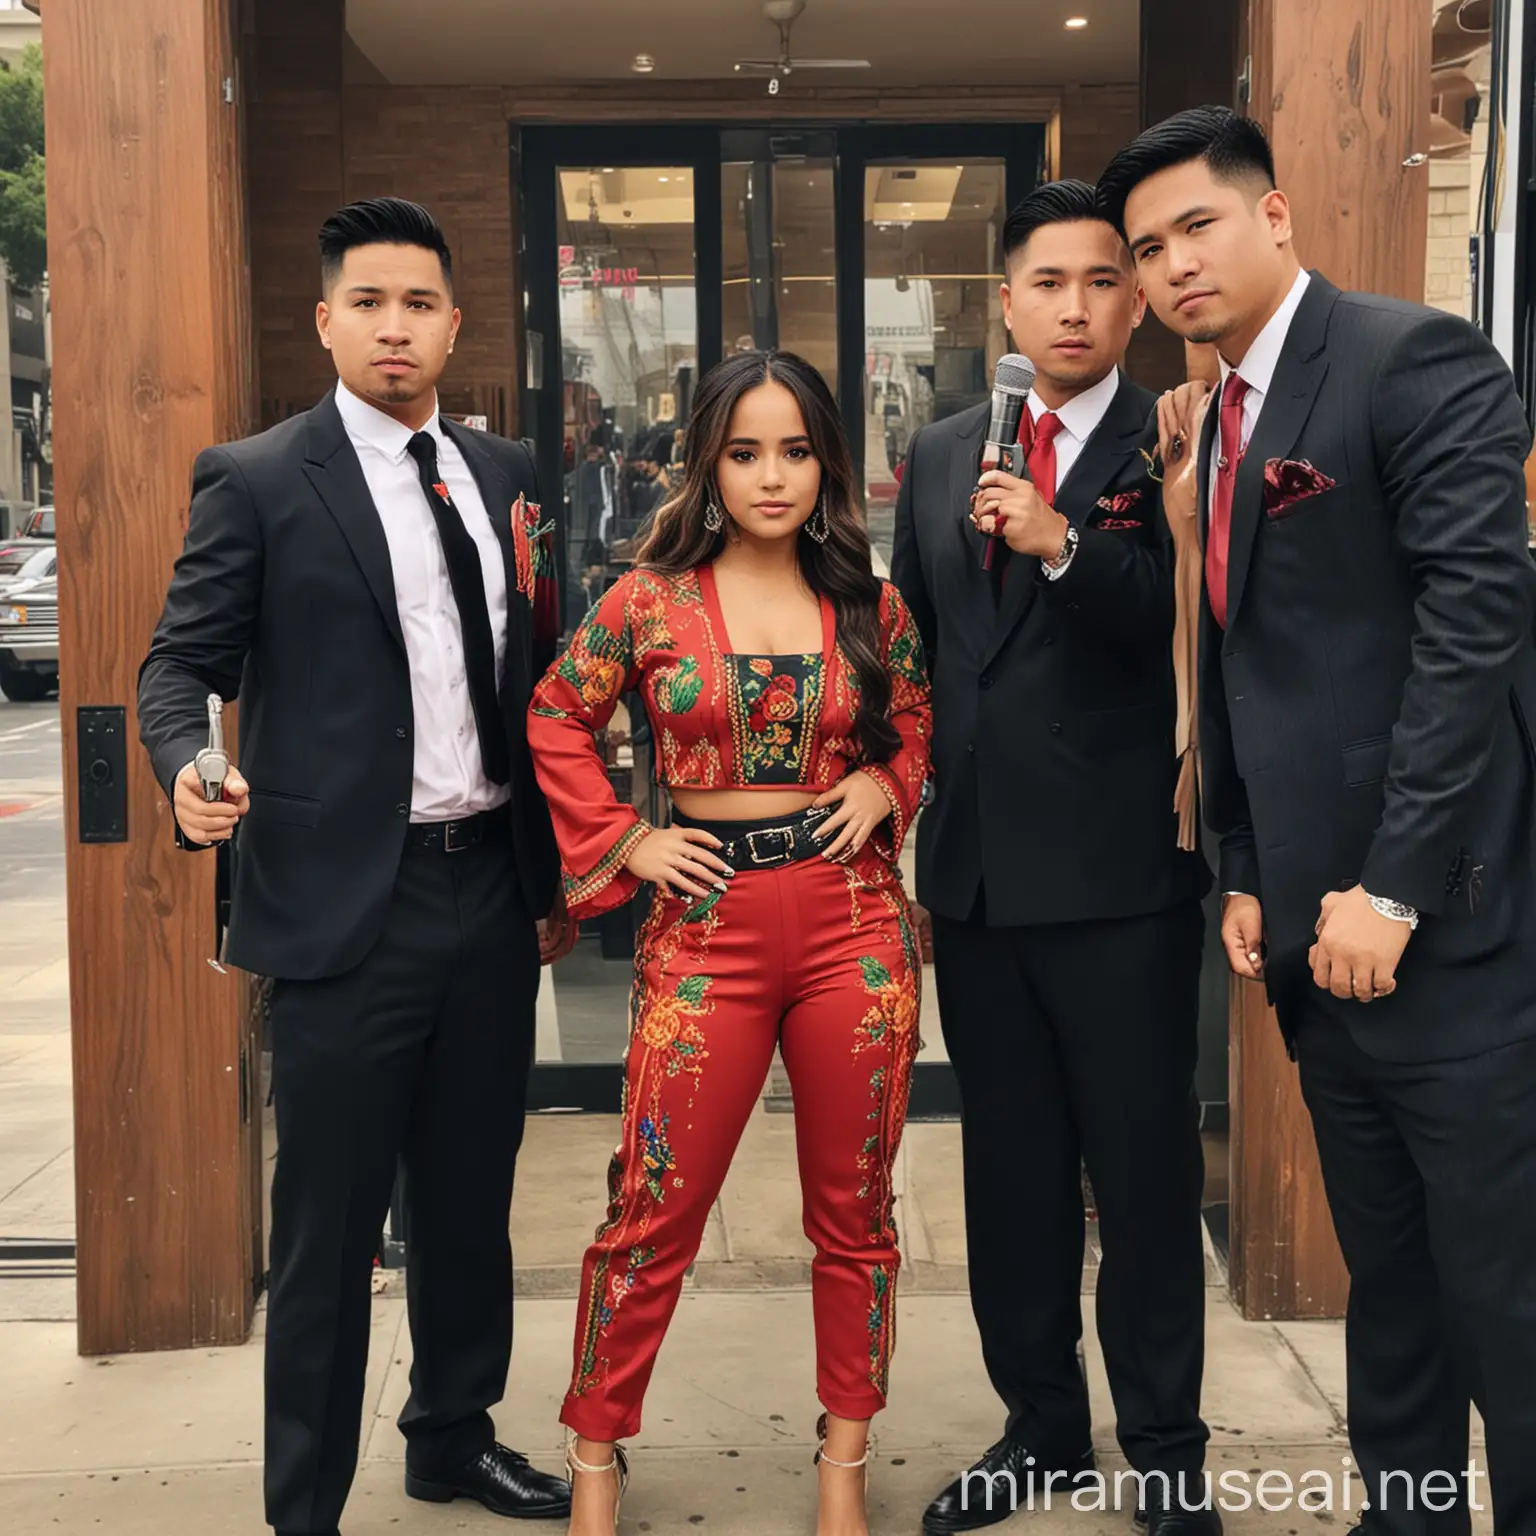 Becky G Performing in Vibrant MexicanThemed Attire with Armed Security at a Fashion Store Entrance